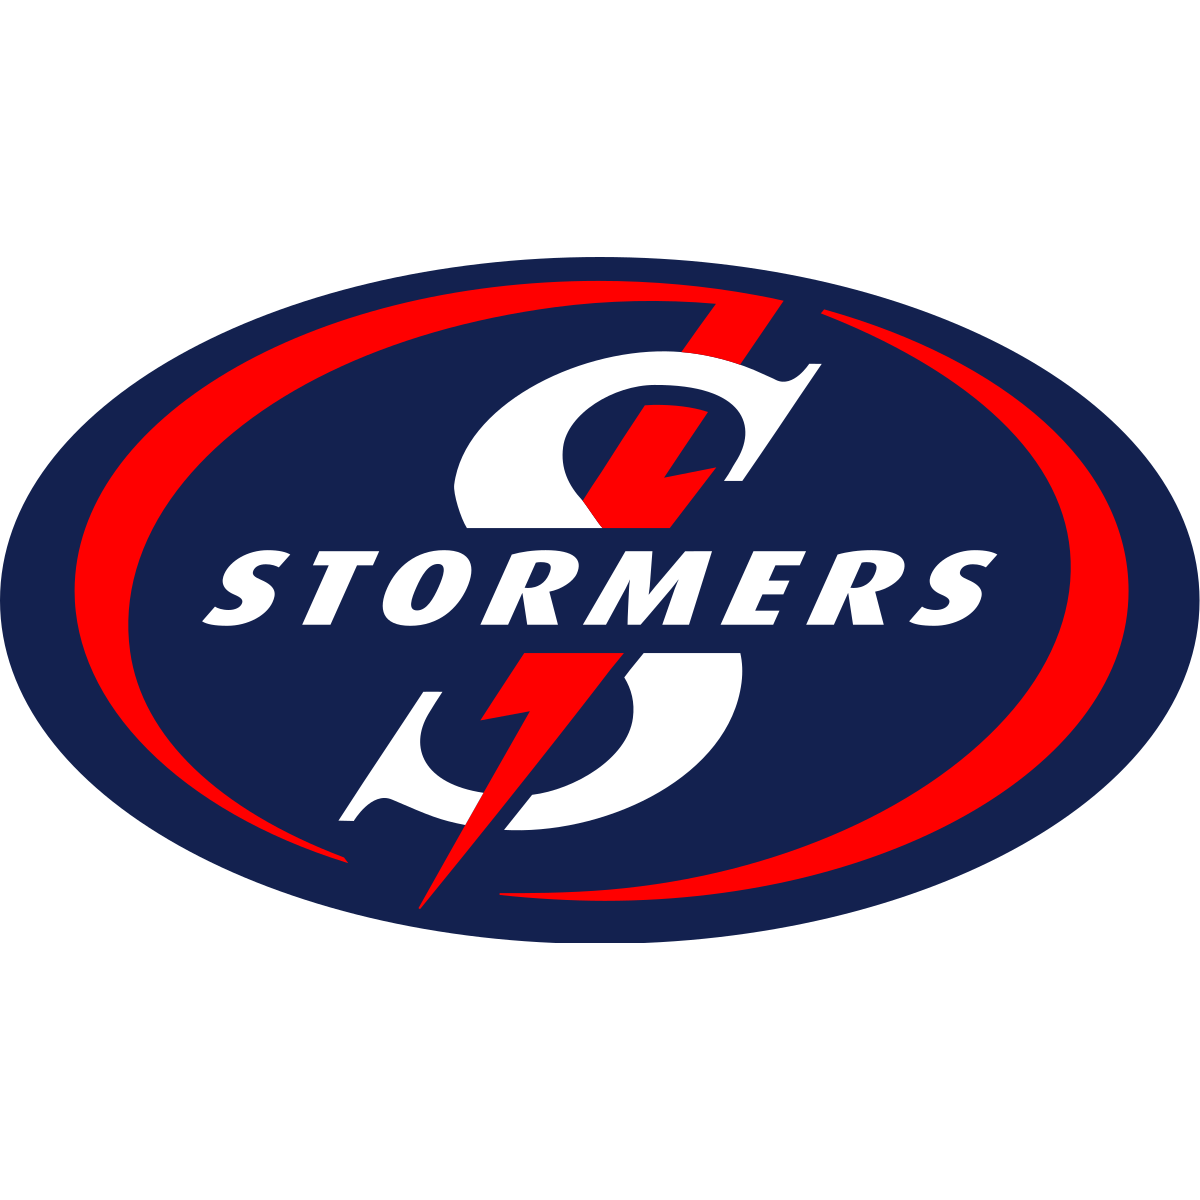 Places Western Stormers